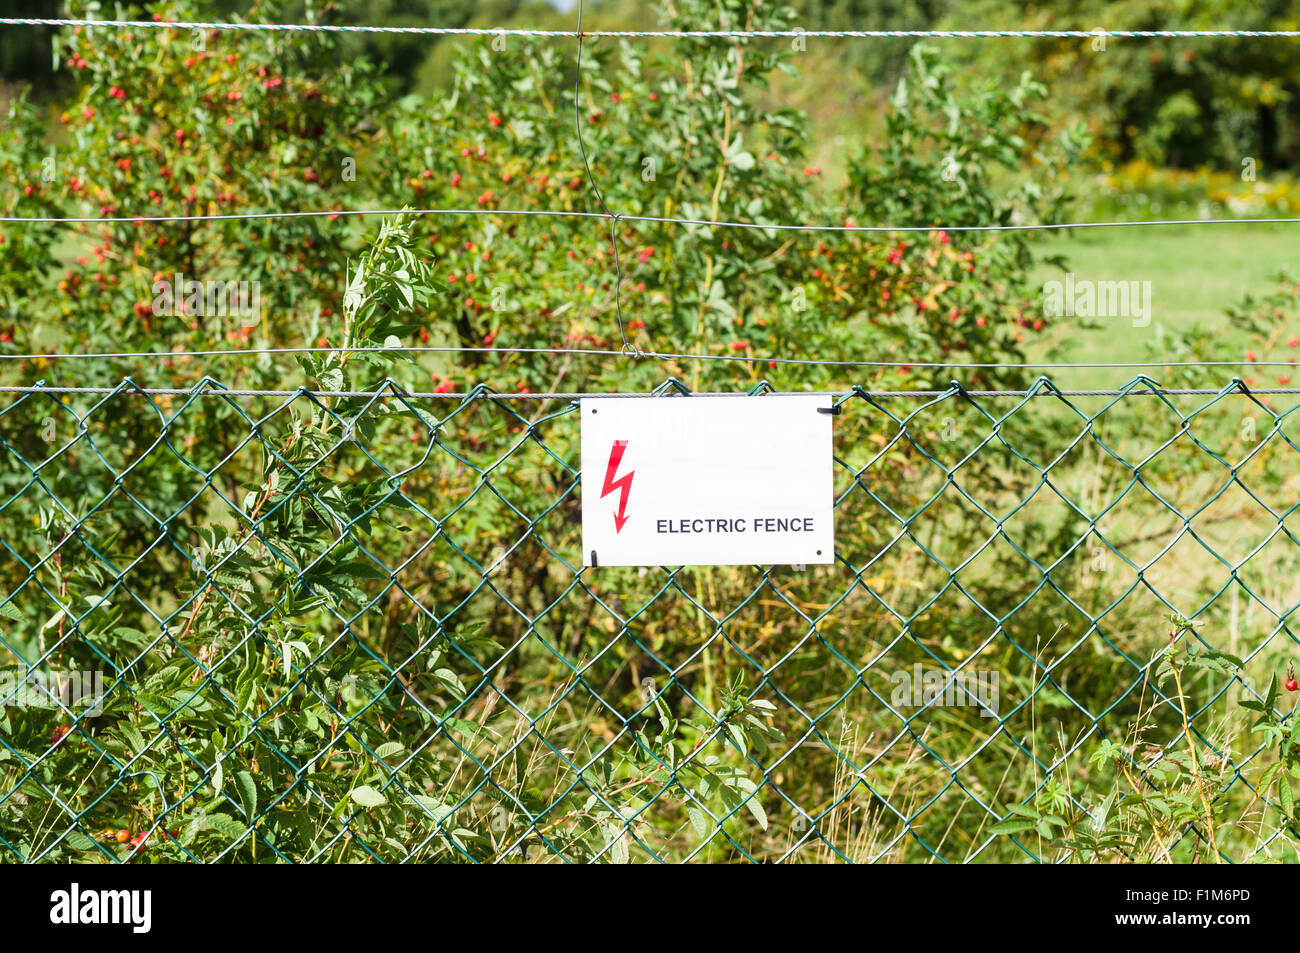 Electric fence with warning sign to prevent shock Stock Photo